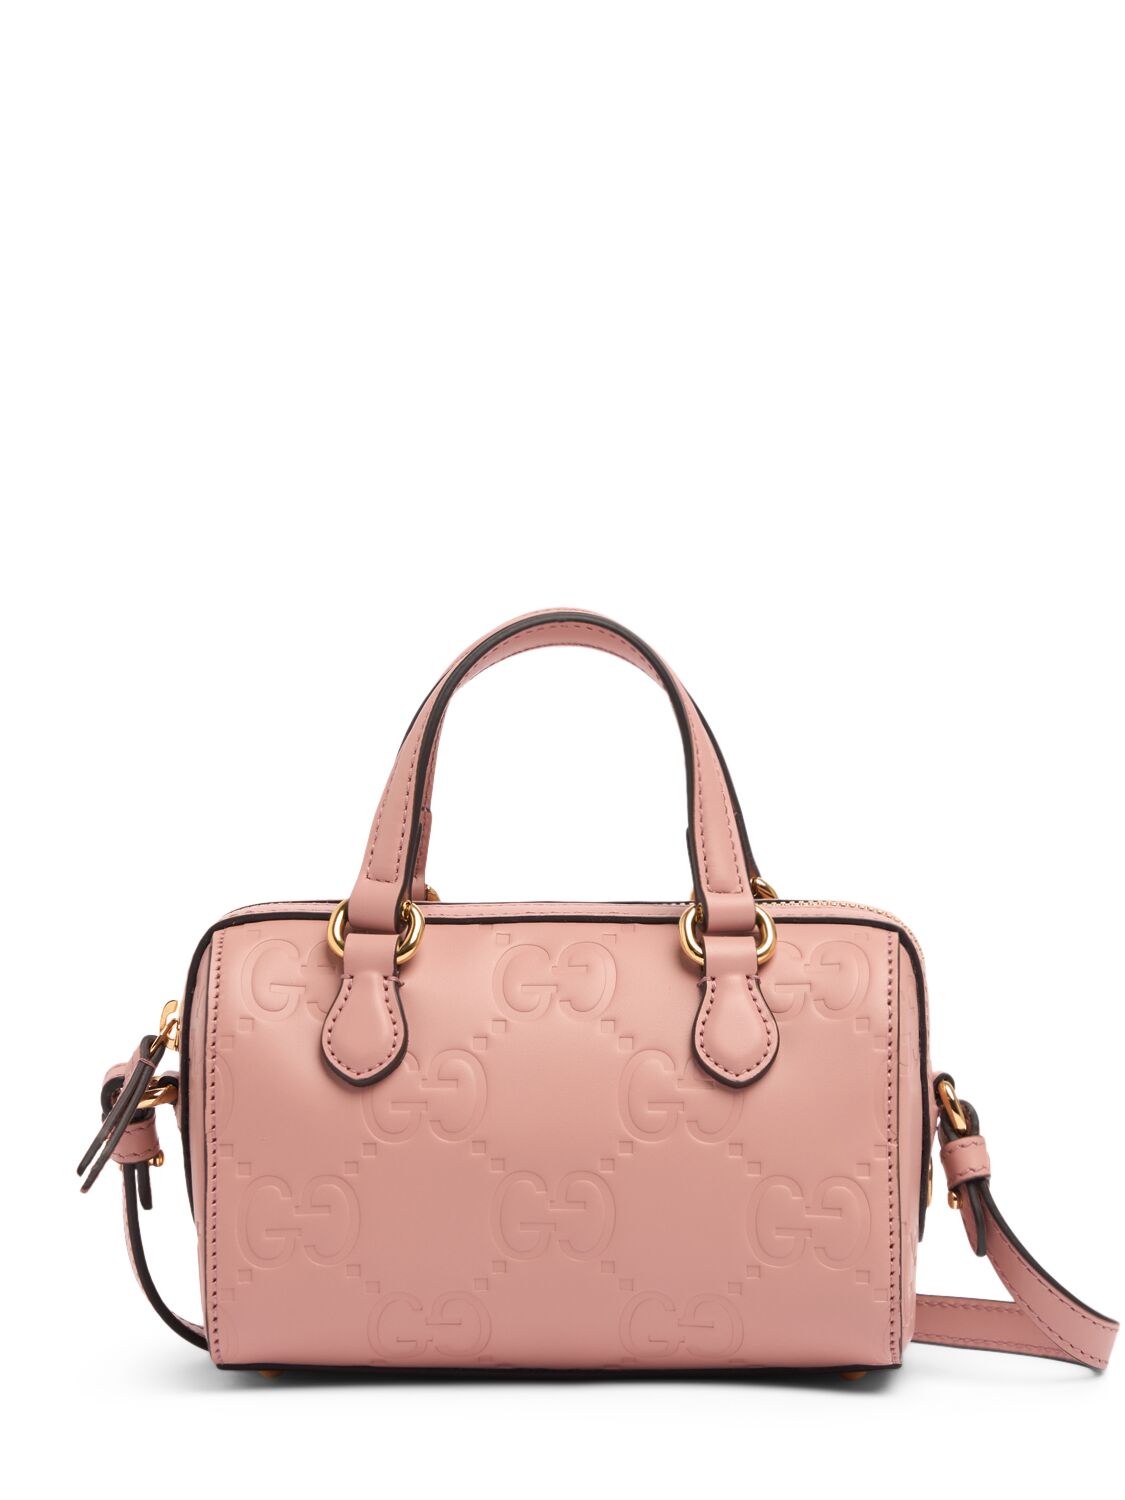 Image of Super Mini Gg Leather Top Handle Bag